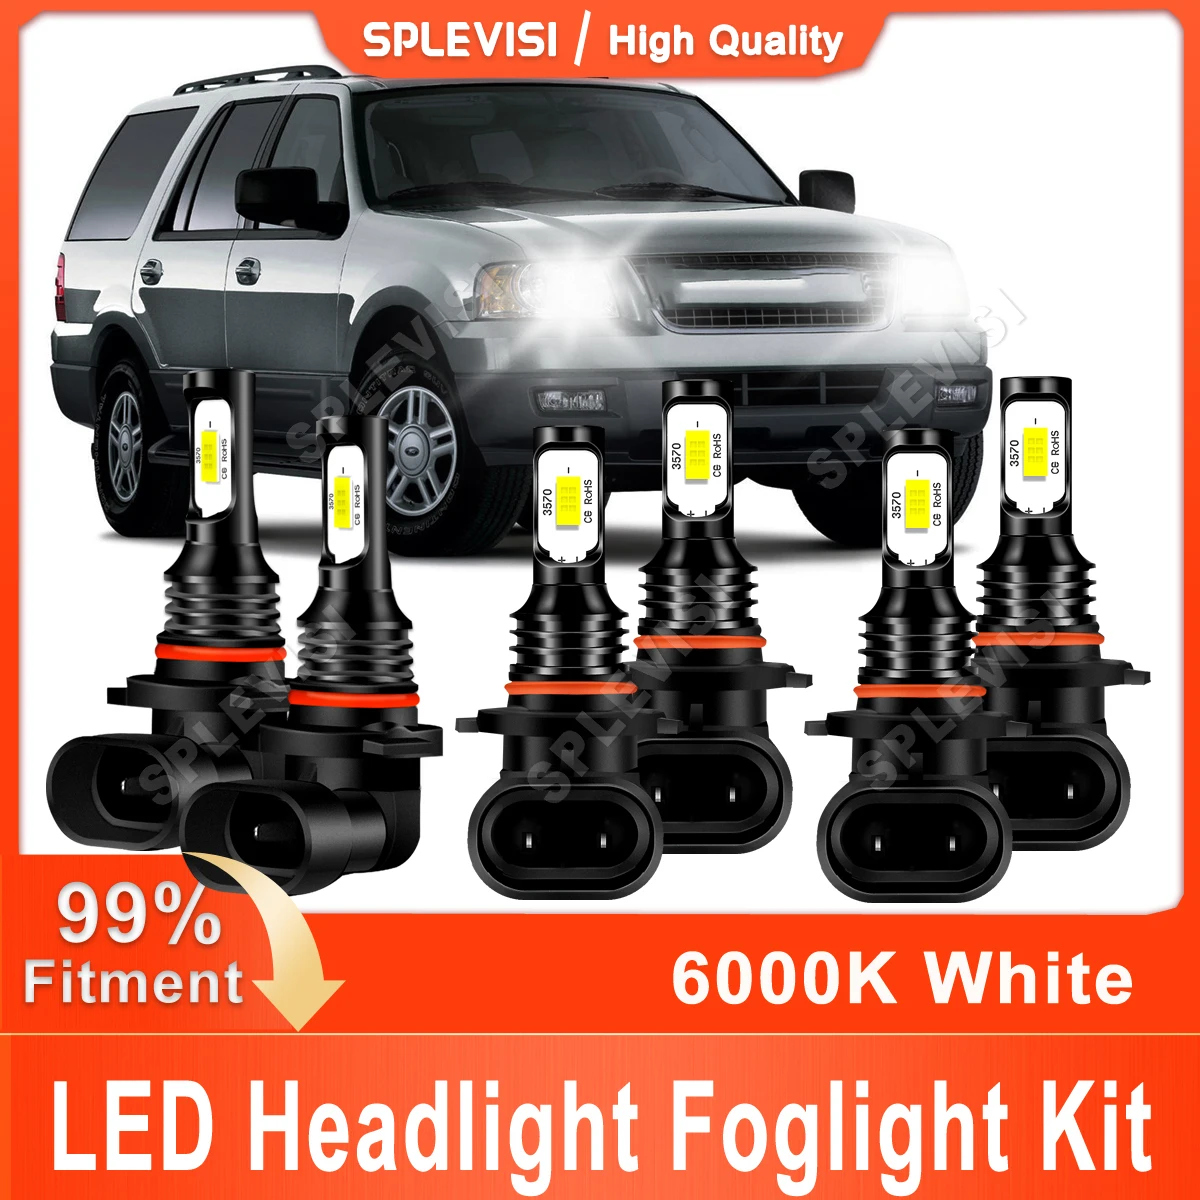 

Car Led Headlight Combo 9005 High Beam 9006 Low Beam 9145 Foglight CSP Chips 6000K White For Ford Expedition 2003 2004 2005 2006